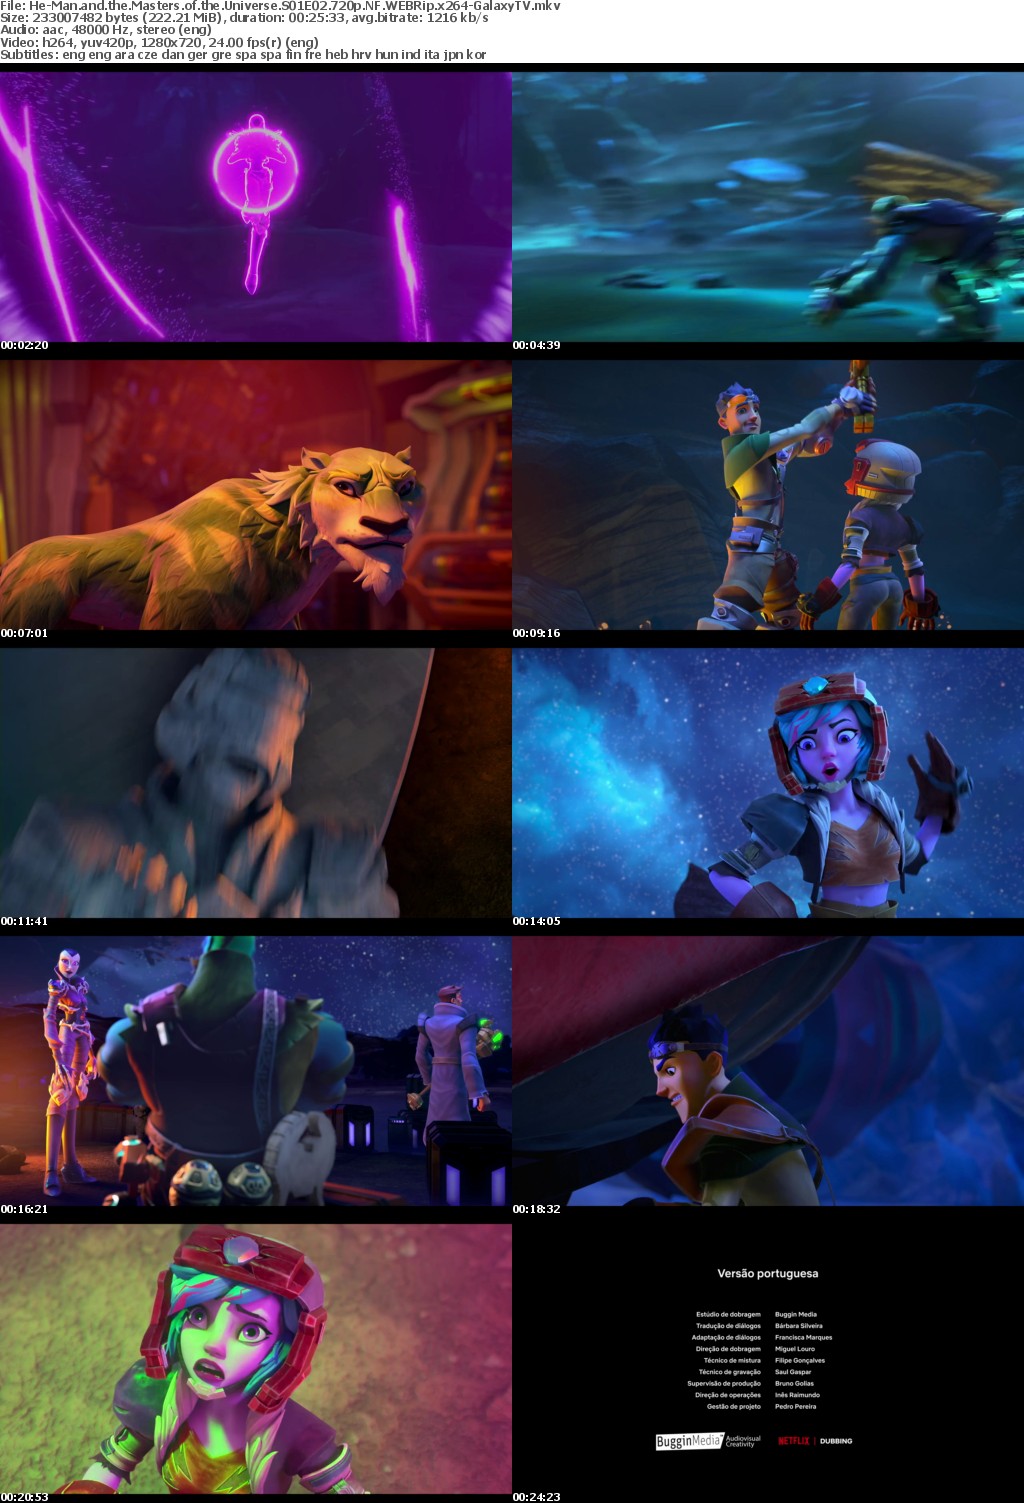 He-Man and the Masters of the Universe S01 COMPLETE 720p NF WEBRip x264-GalaxyTV